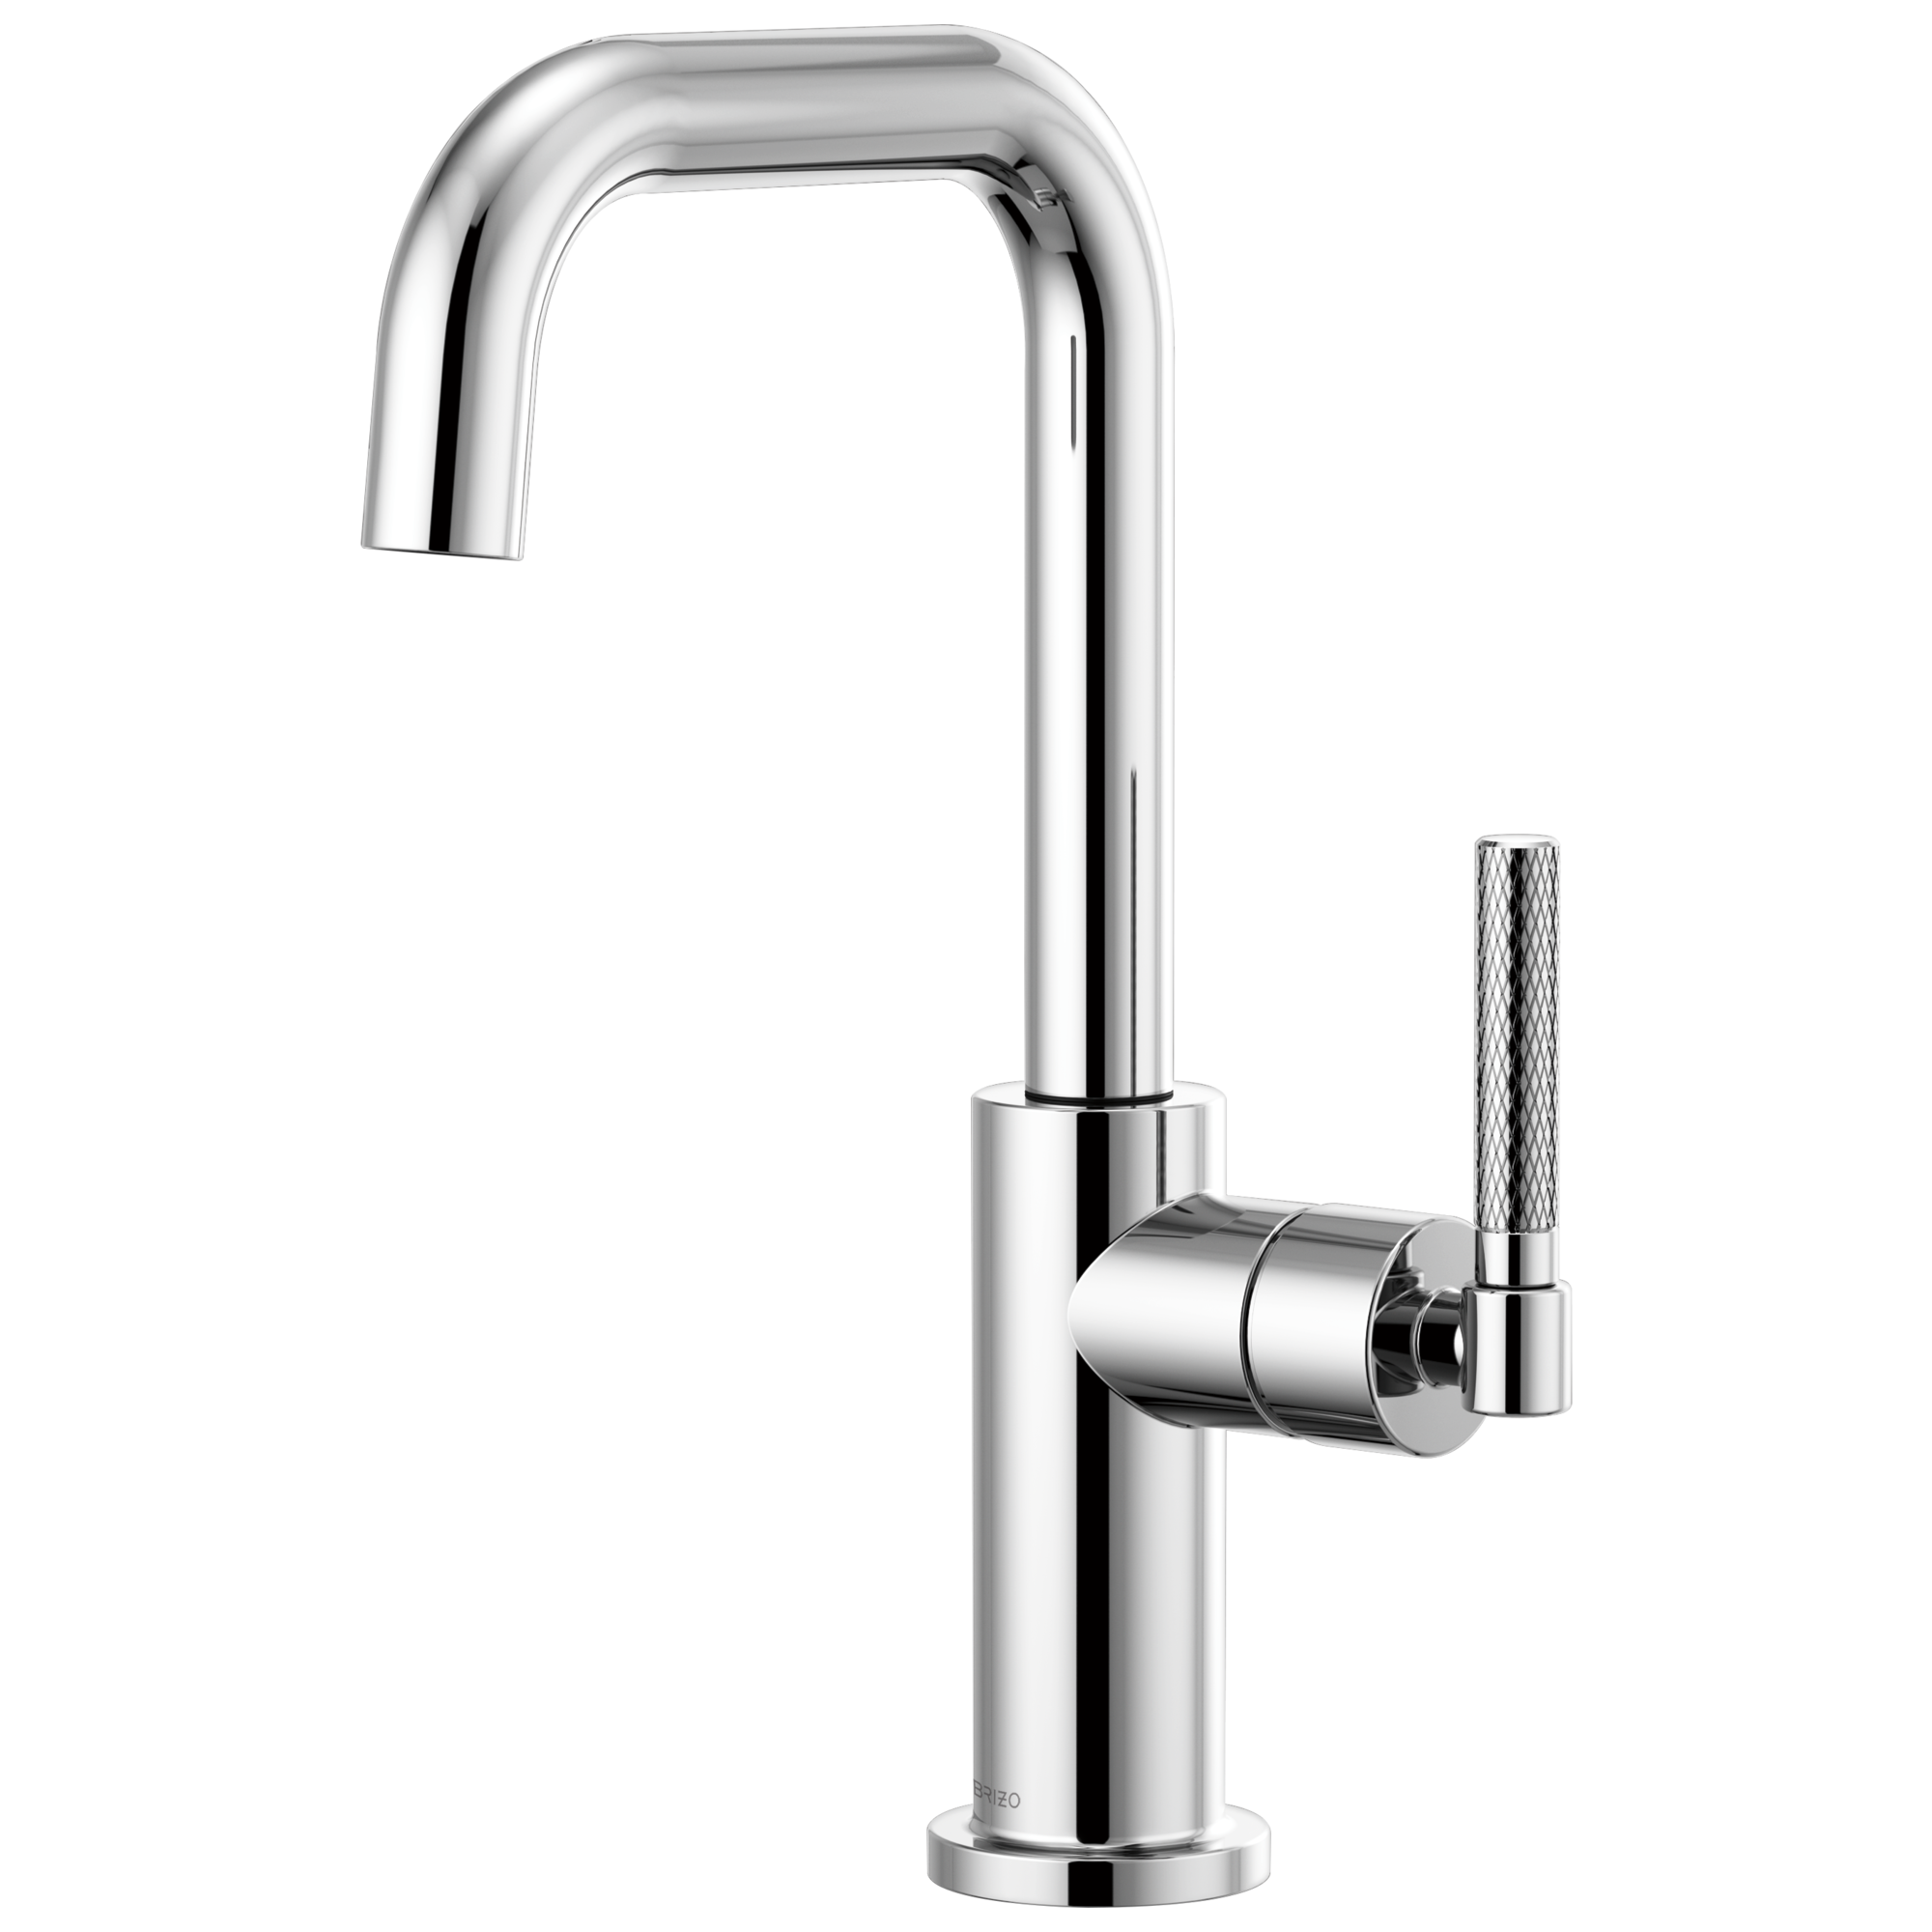 Brizo Litze: Bar Faucet with Square Spout and Knurled Handle